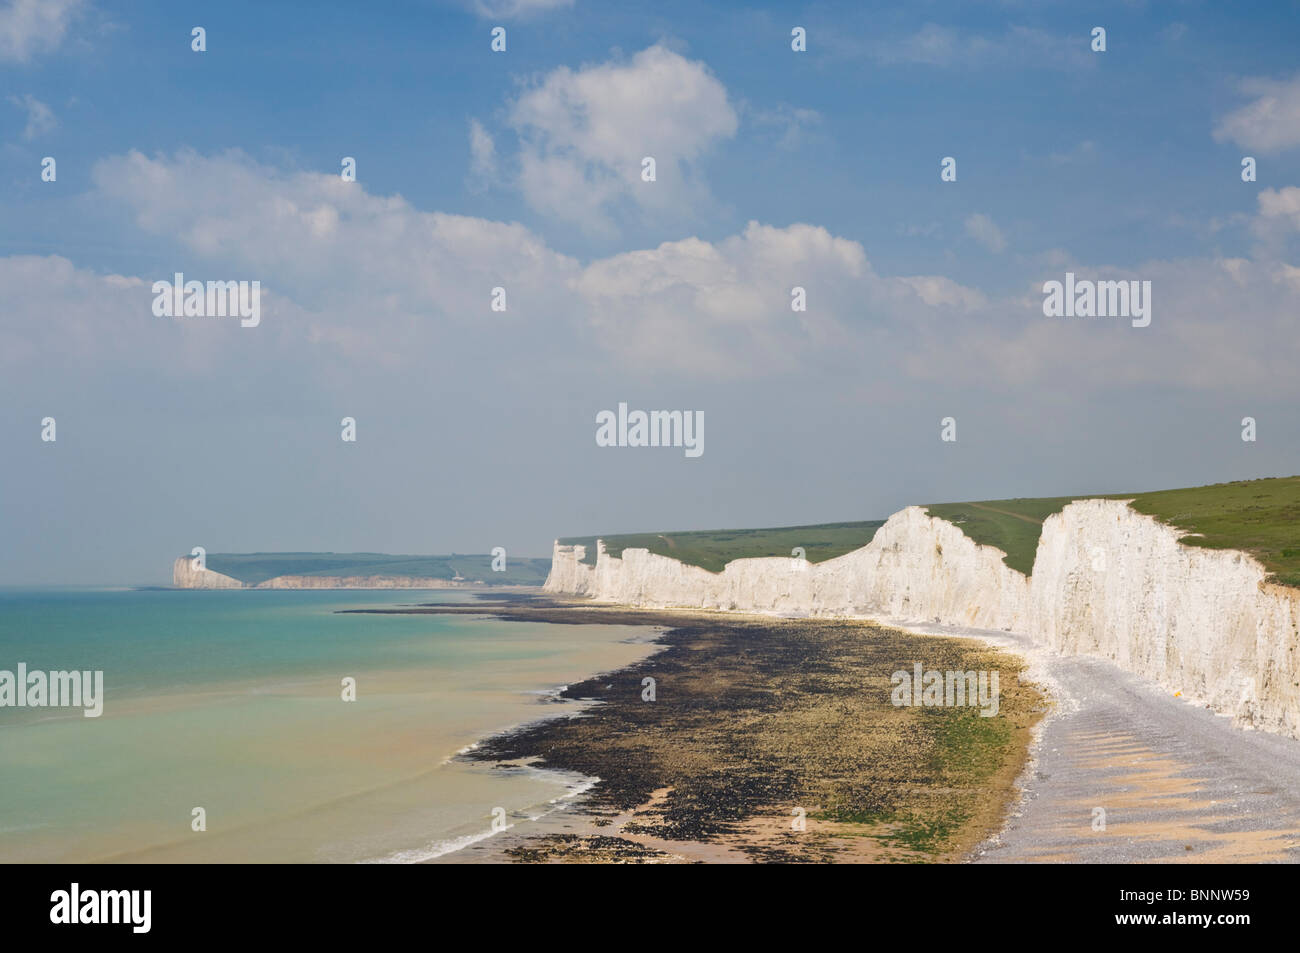 Sette sorelle scogliere, Birling Gap beach, South Downs Way, South Downs National Park, East Sussex, England, Regno Unito Foto Stock